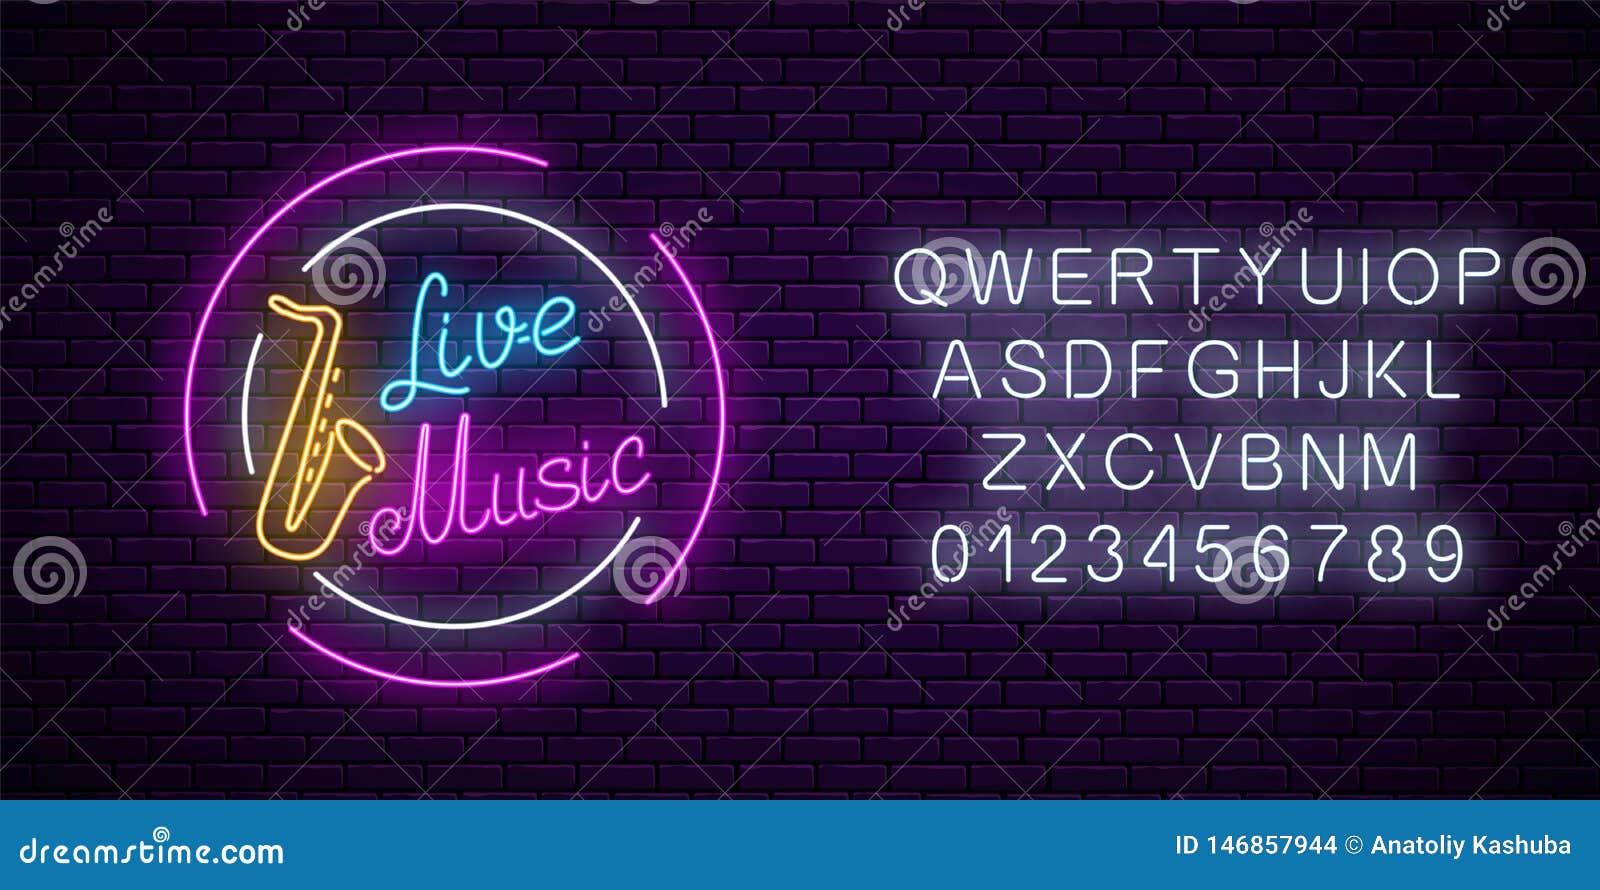 Neon Sign Of Bar With Live Music With Alphabet Advertising Glowing Signboard Of Sound Cafe With Saxophone Symbol Stock Vector Illustration Of Live Entertainment 146857944